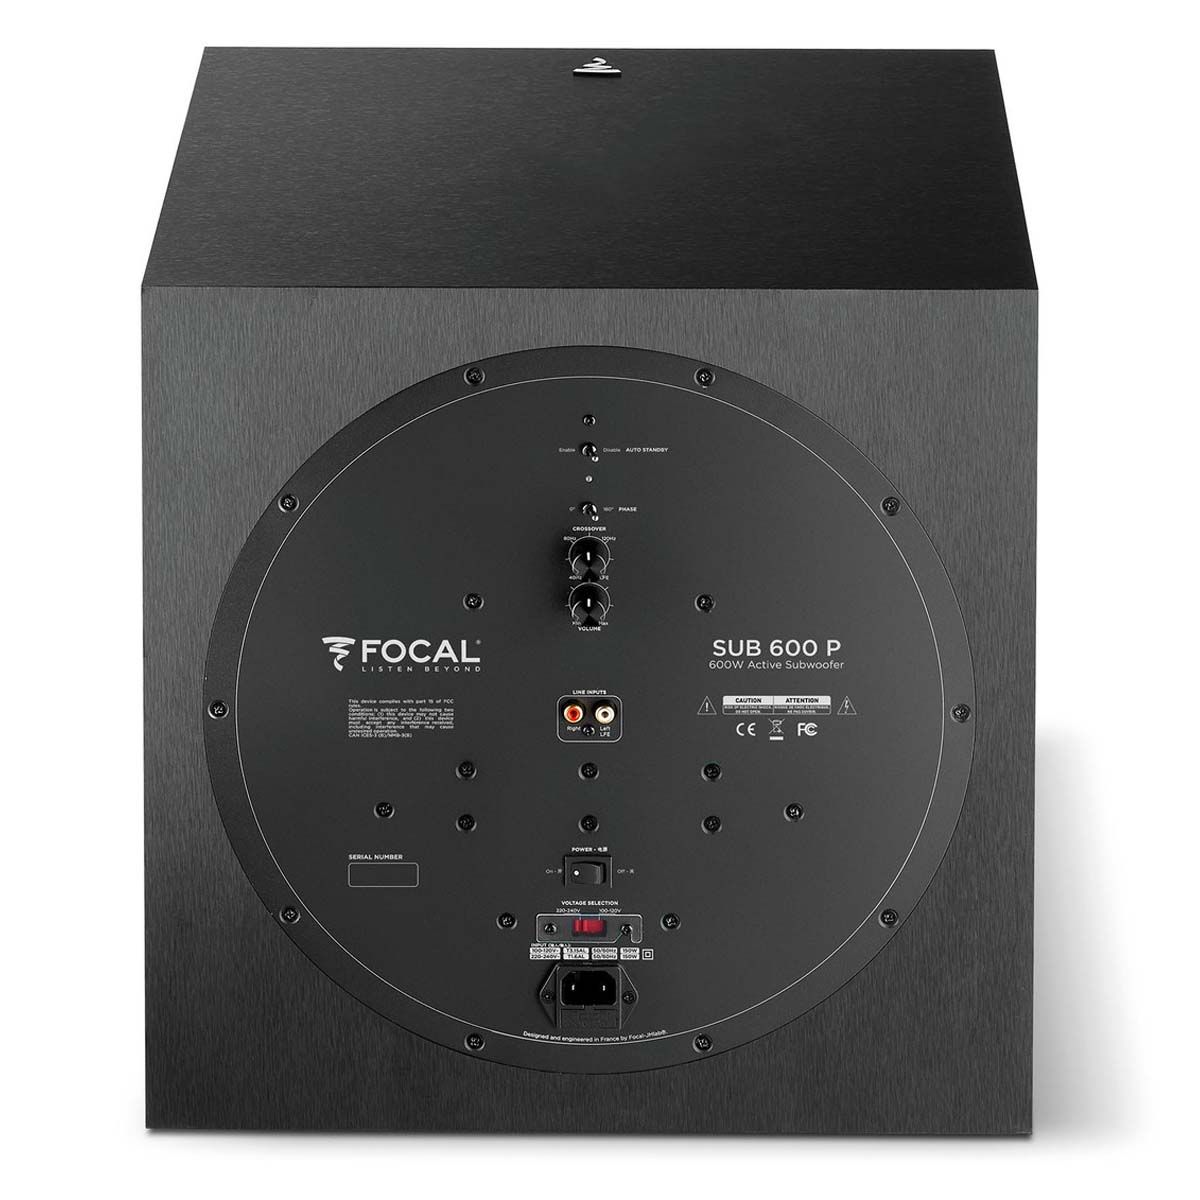 Focal Sub 600P Subwoofer rear view